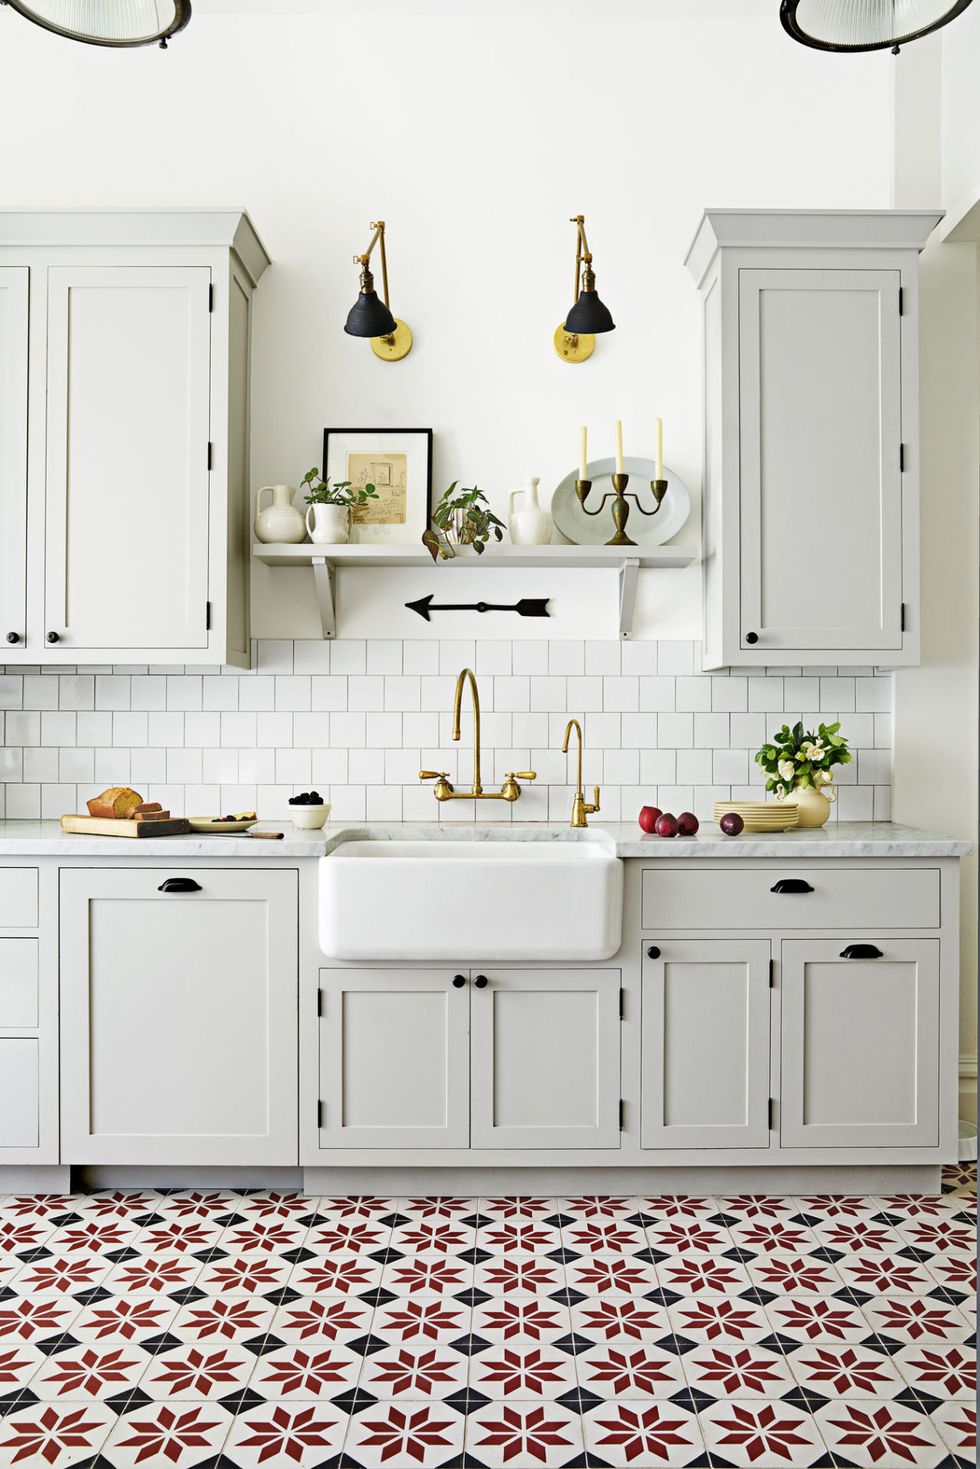 All white kitchen with red and black Scandinavian style floor tile